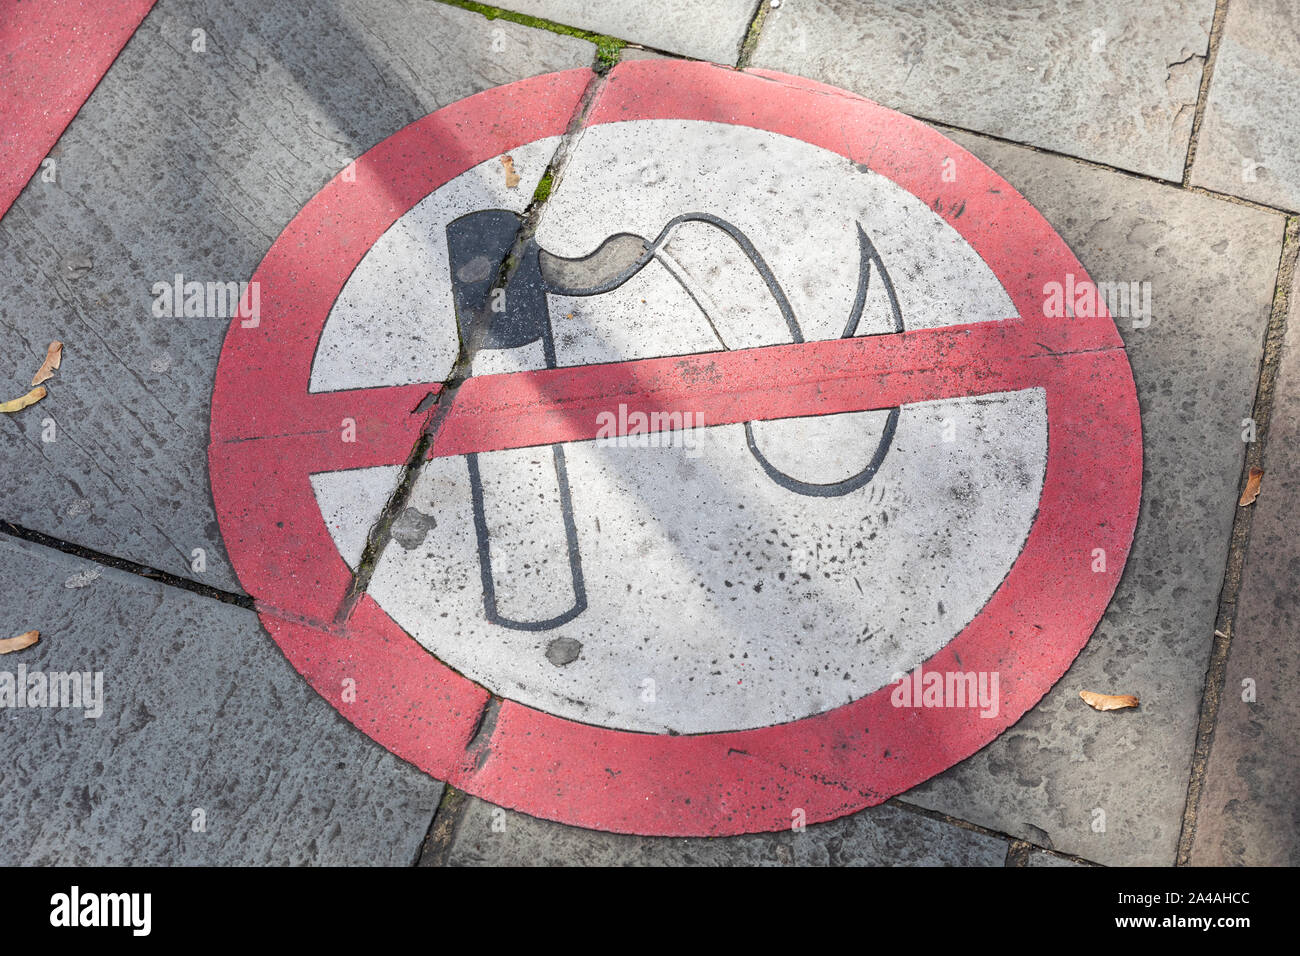 A no smoking sign painted on to the pavement of a private area on a city street Stock Photo